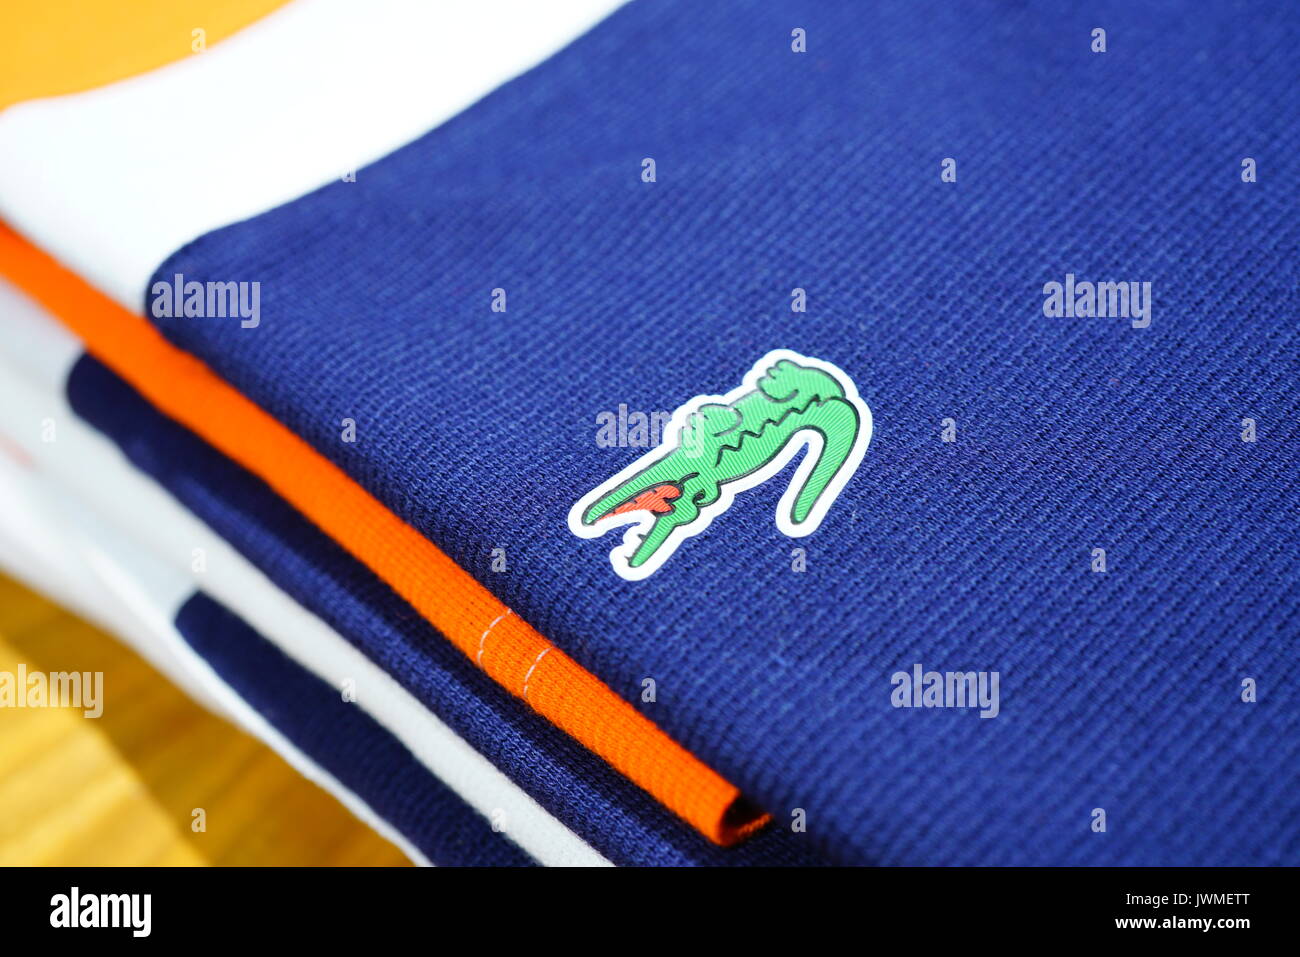 lacoste french clothing